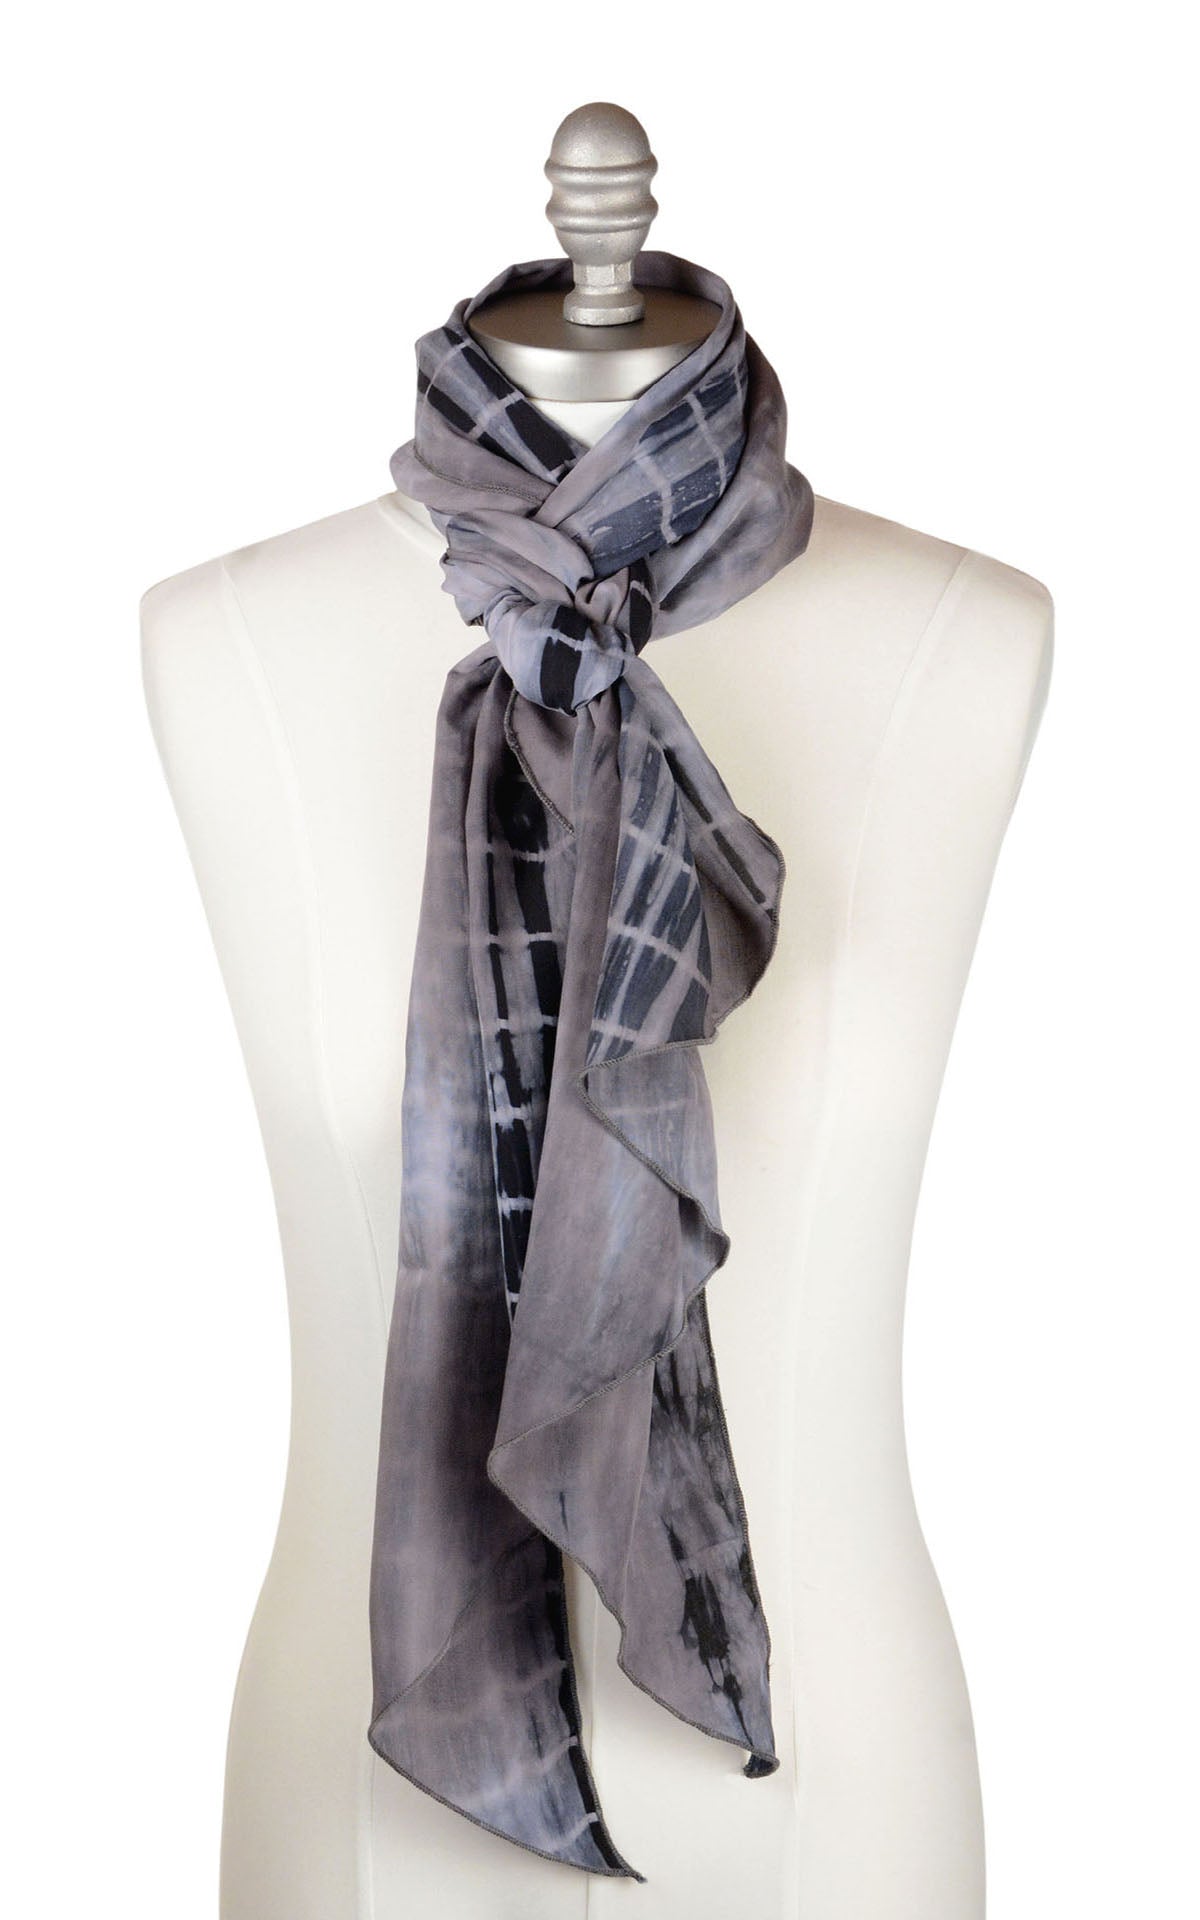 Handkerchief Scarf in Earl Grey, part of the Tea Time 2 Collection. LYC by Pandemonium is handmade in Seattle, WA, USA.